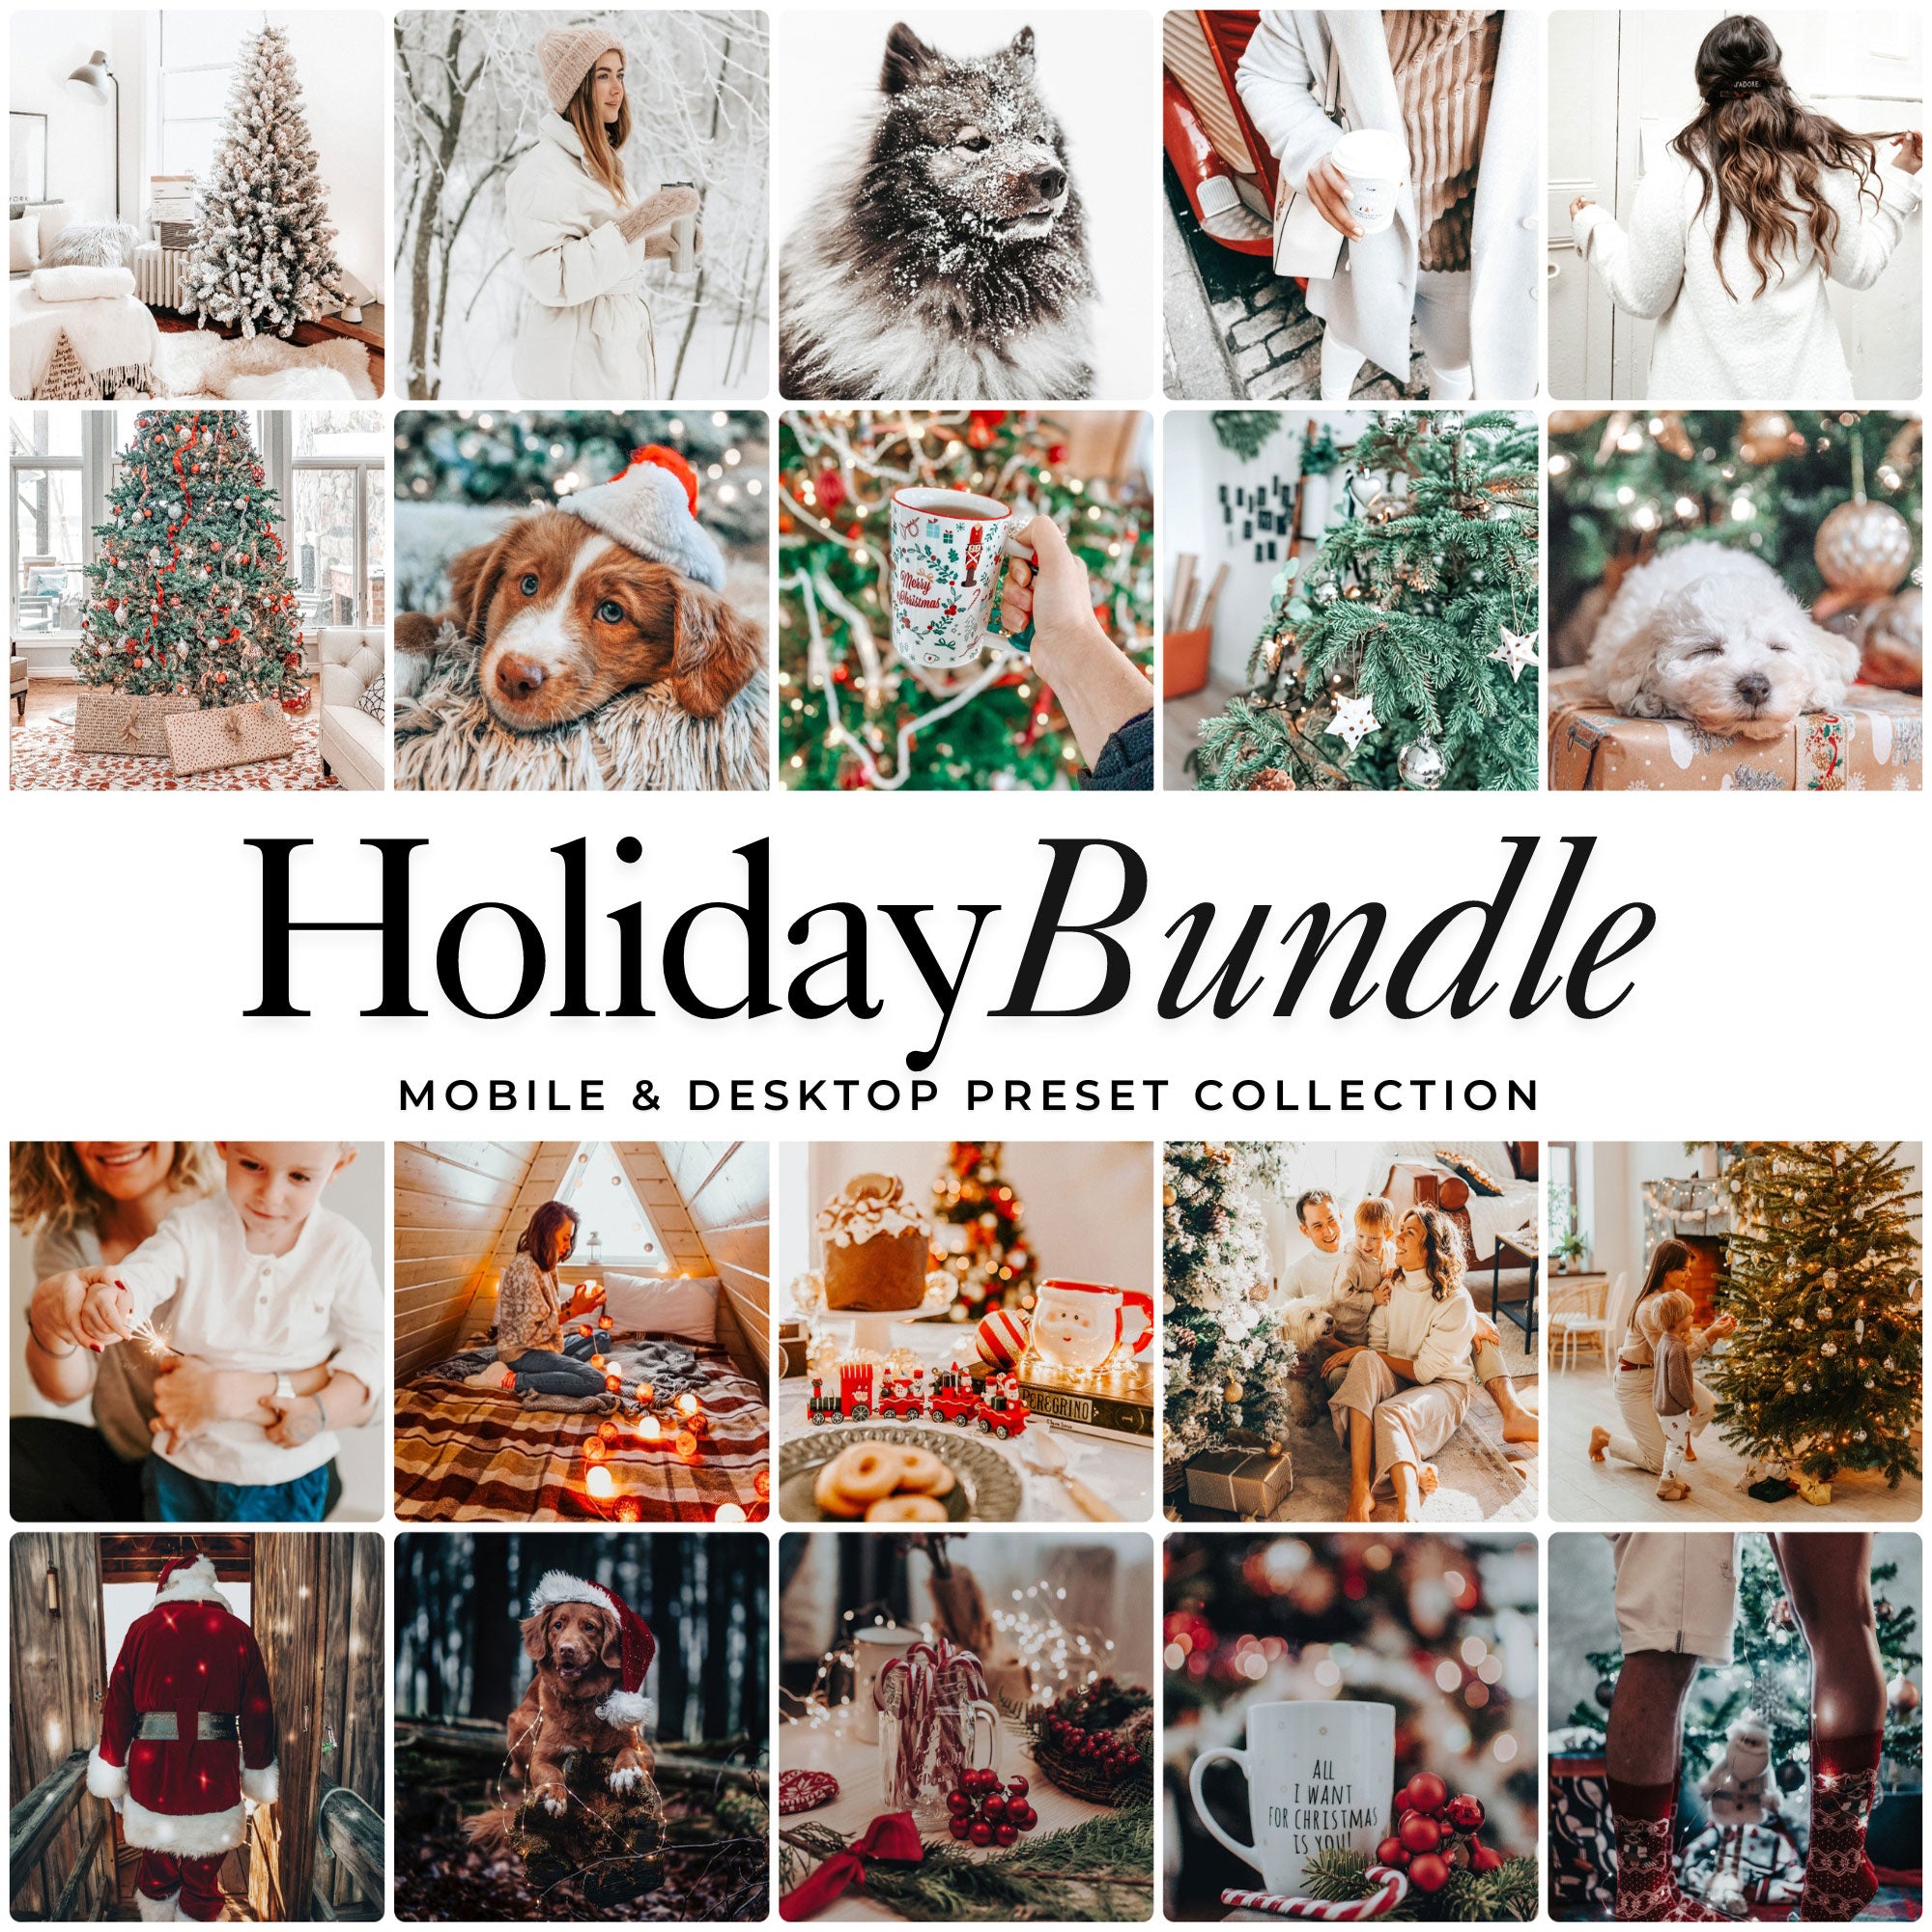 The Best Holiday Christmas Lightroom Presets For Photographers and Instagram Influencers Photo Editing In Adobe Lightroom By Lou And Marks Presets